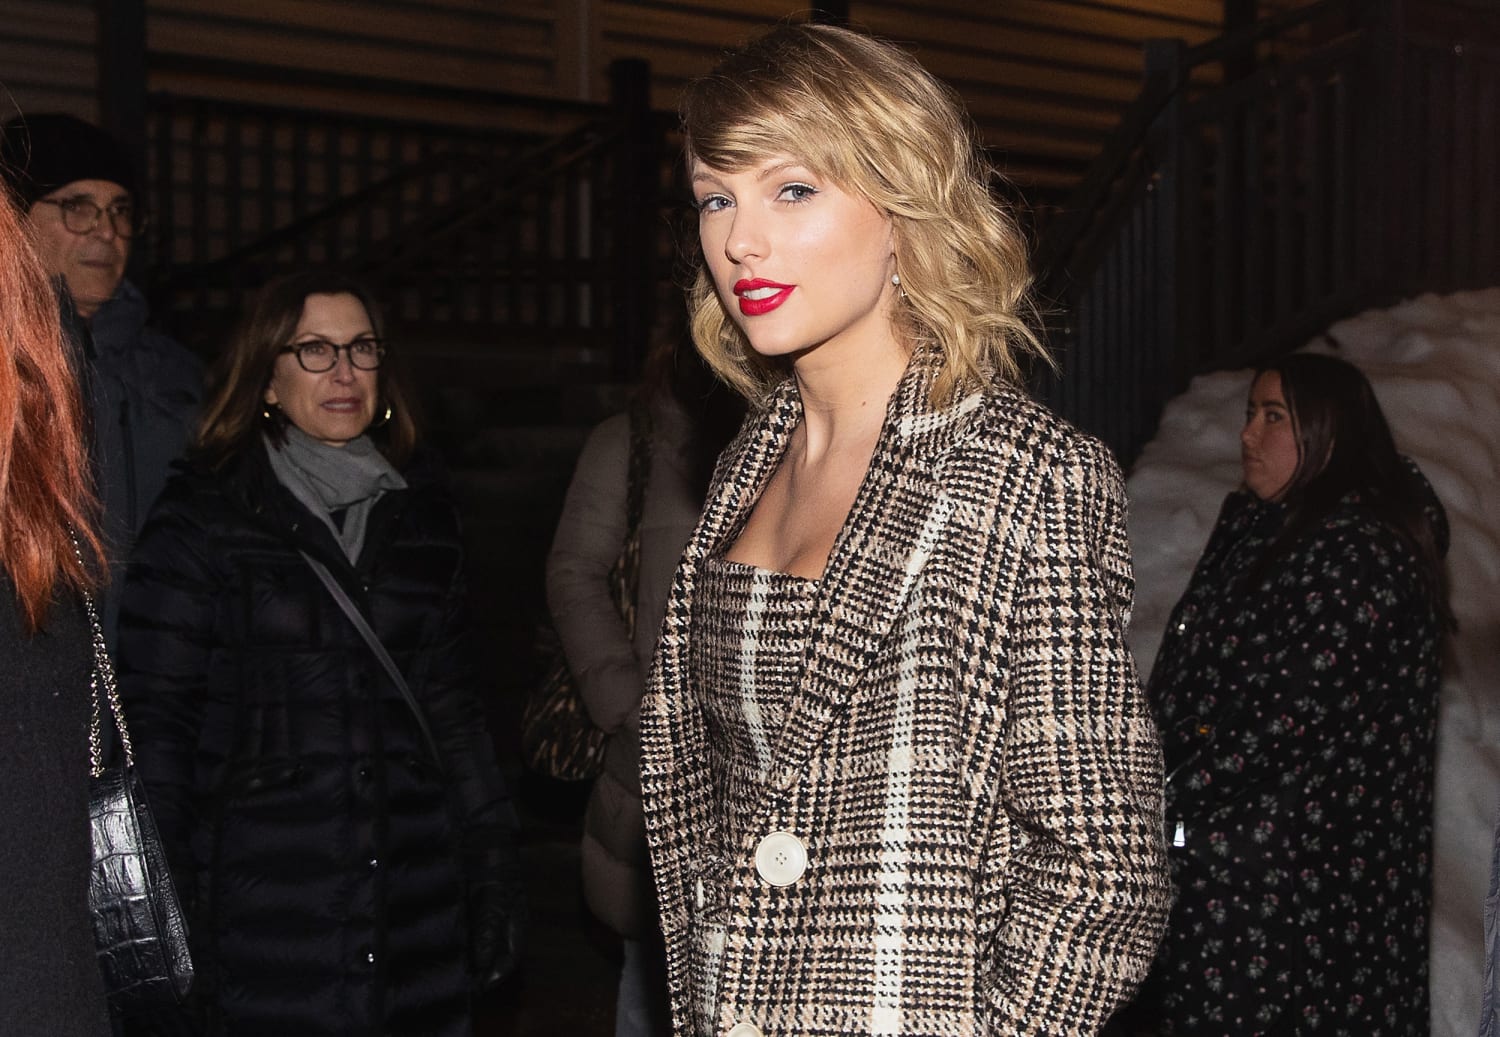 Taylor Swift Makes 13 000 Donations To 2 Moms On Verge Of Eviction Amid Pandemic